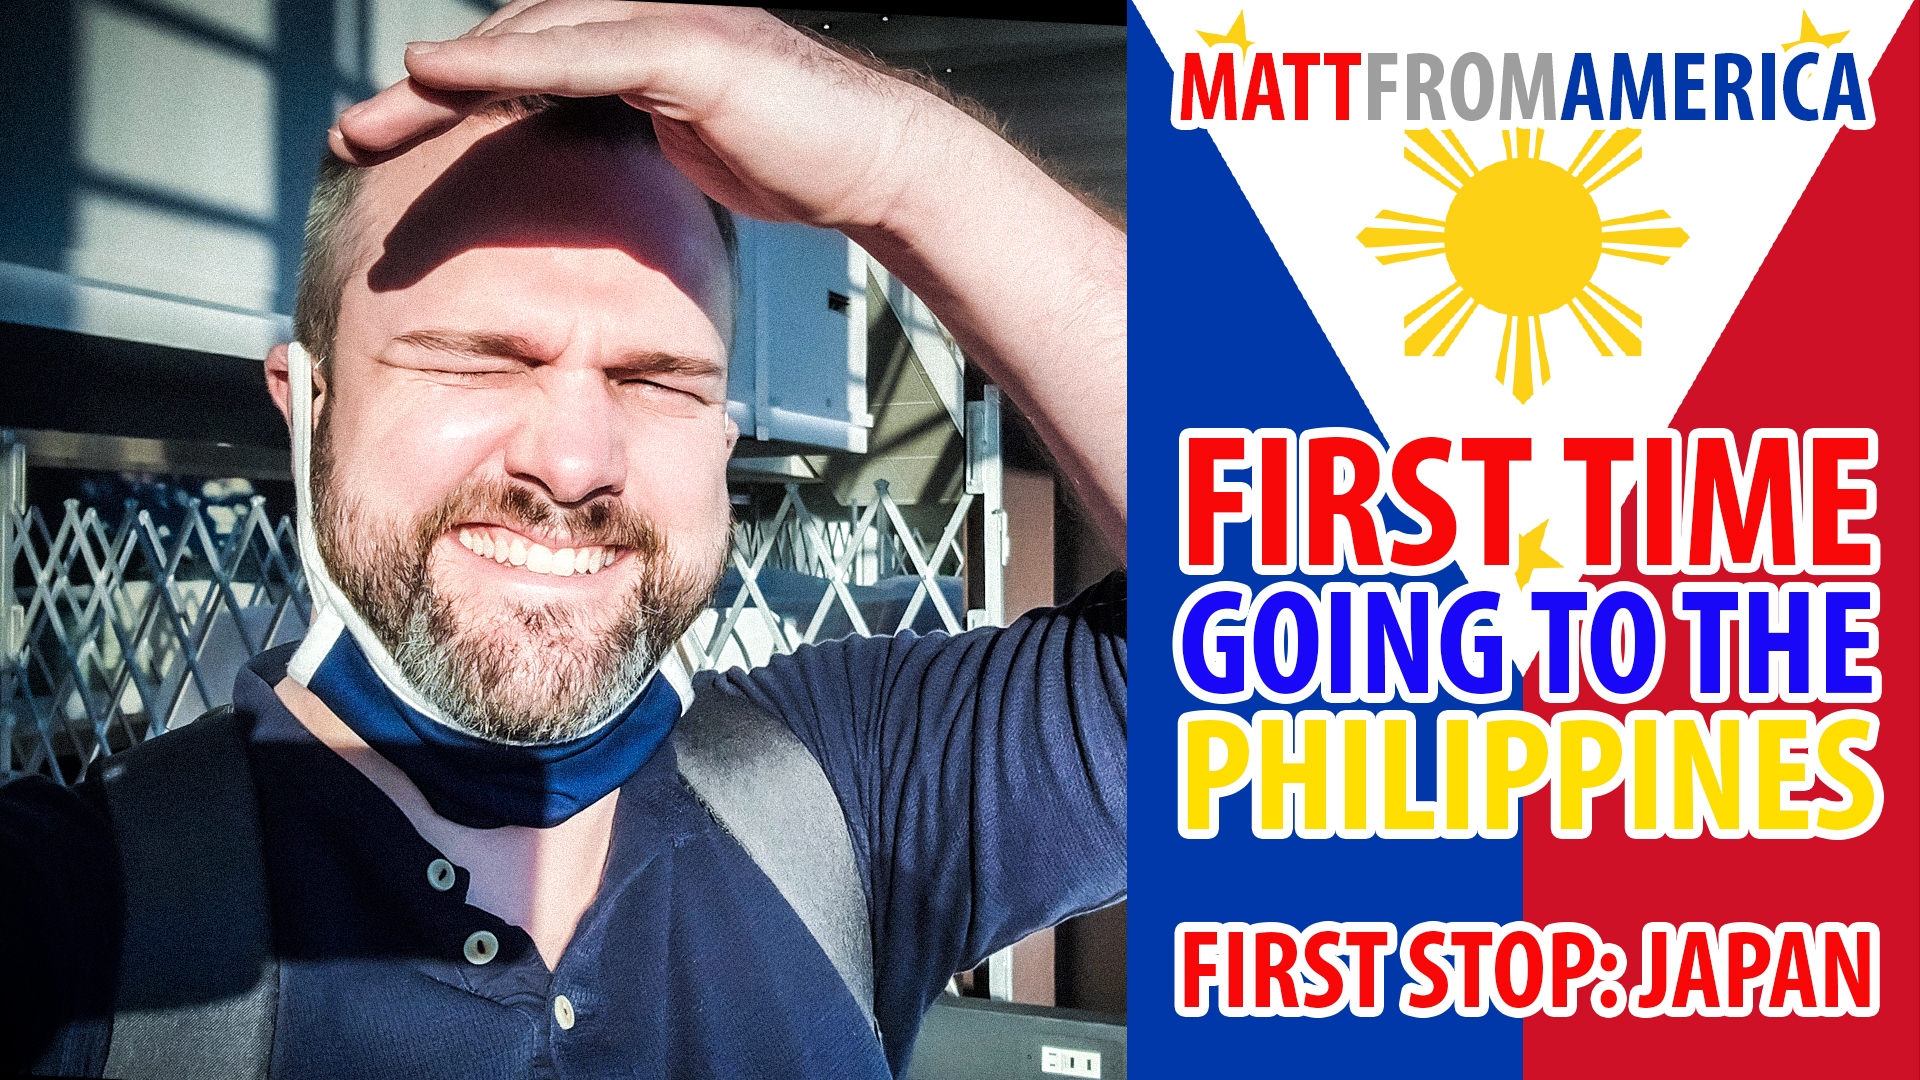 First time going to the Philippines First Stop Japan